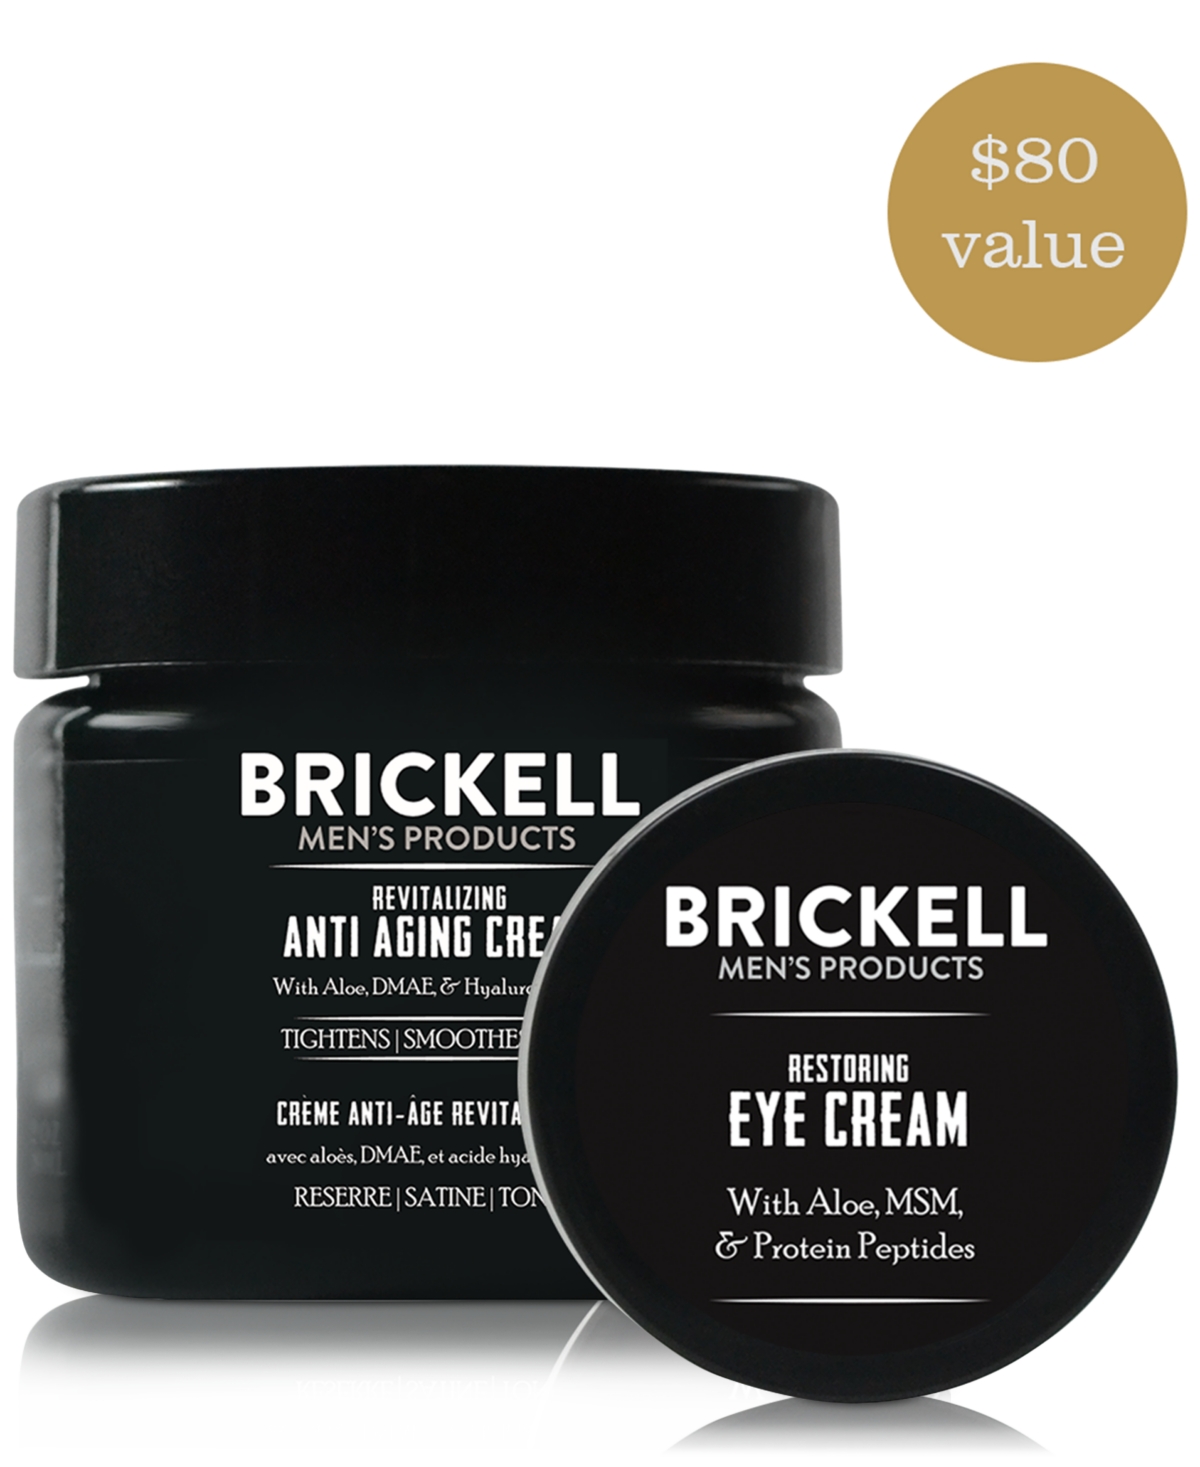 Brickell Men's Products 2-Pc. Ultimate Men's Skincare Set